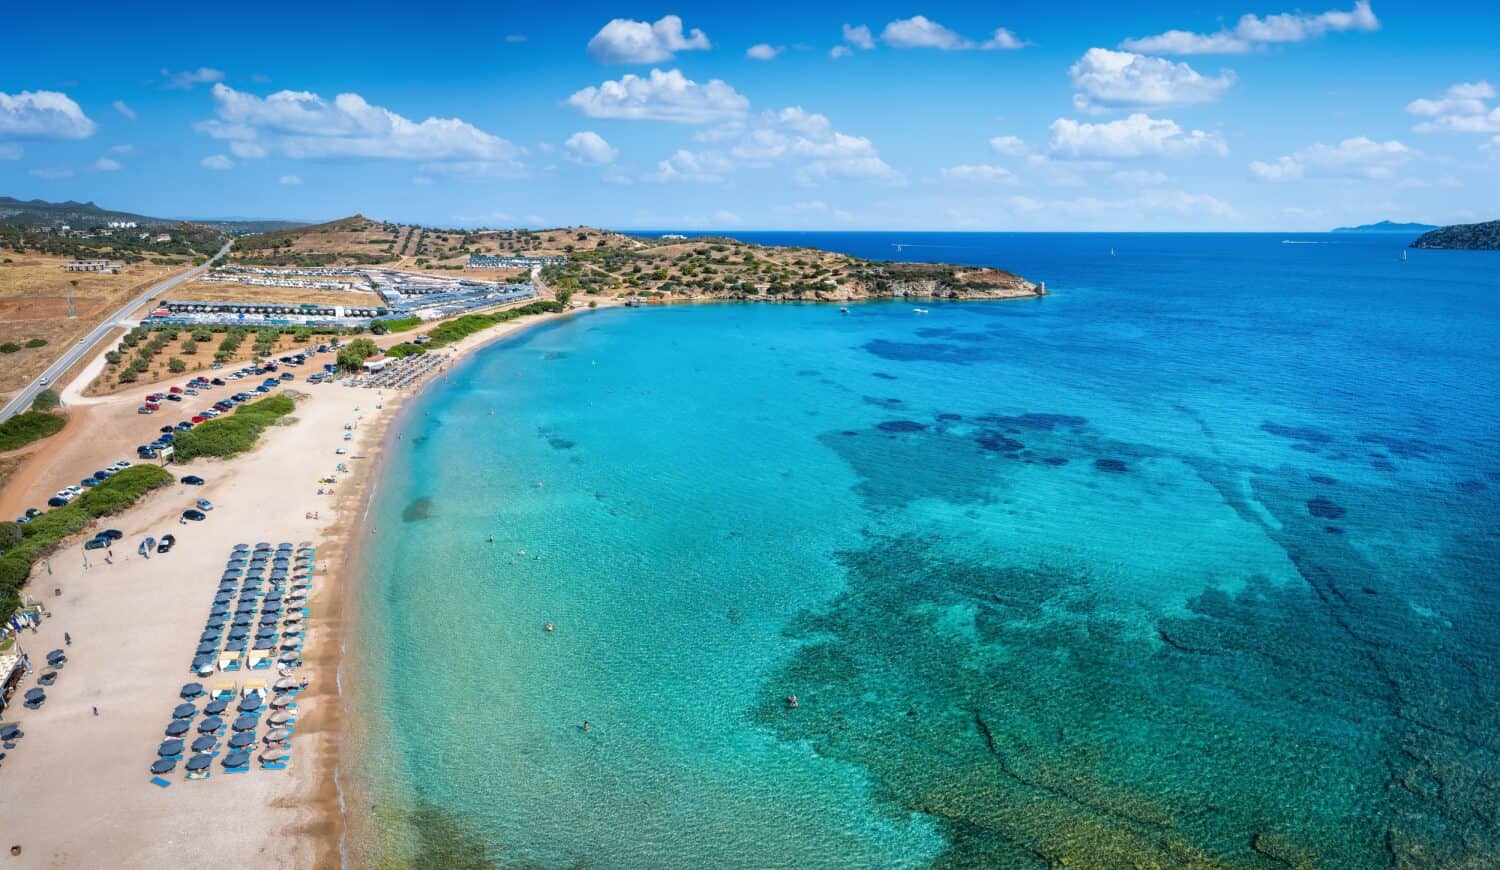 Aerial view of the beautiful beach of Legrena, Attica, Greece, popular spot for local Athenians and tourists